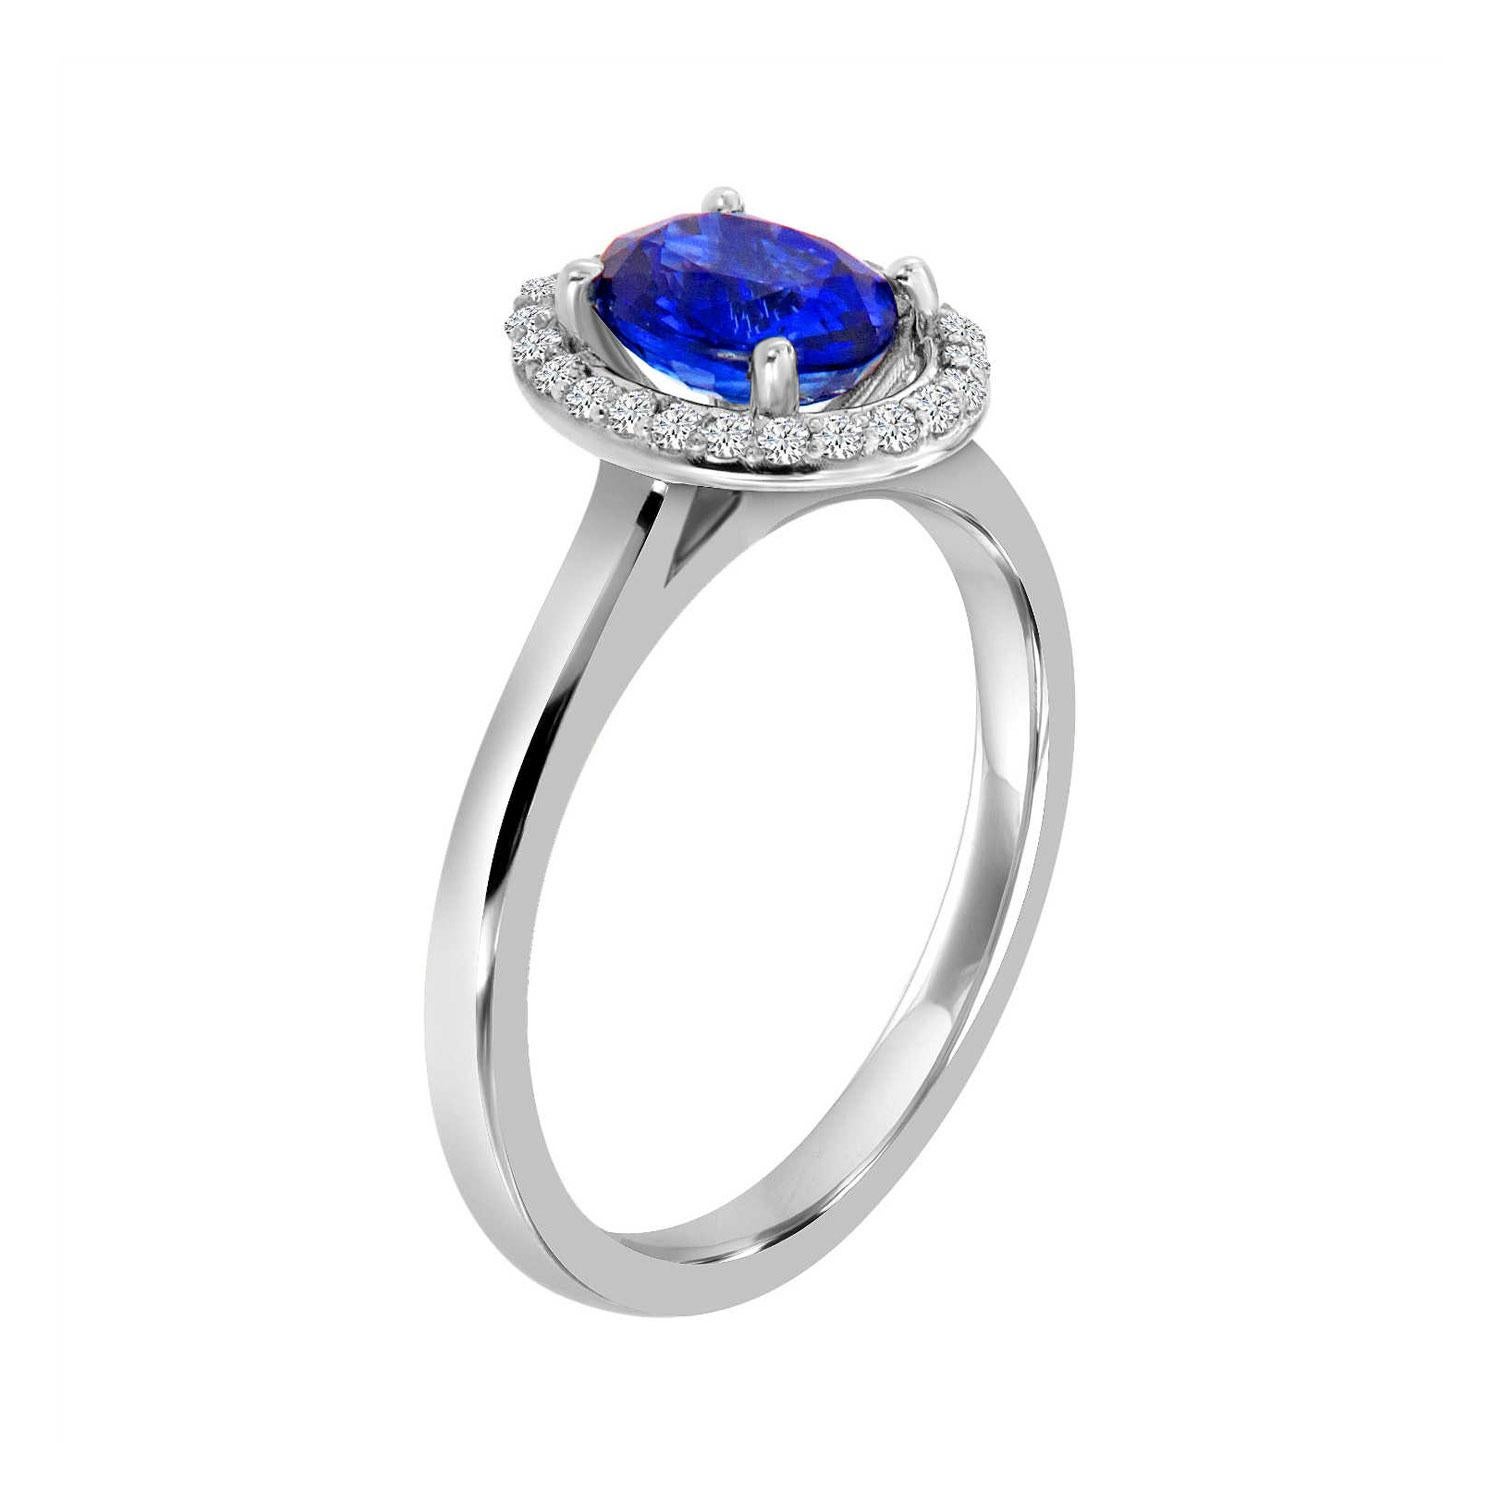 This elegant style ring features a 1.48-carat Oval shape Blue Sri-Lankan Sapphire encircled by a halo of brilliant round diamonds. Experience the difference in person!

Product details: 

Center Gemstone Type: SAPPHIRE
Center Gemstone Carat Weight: